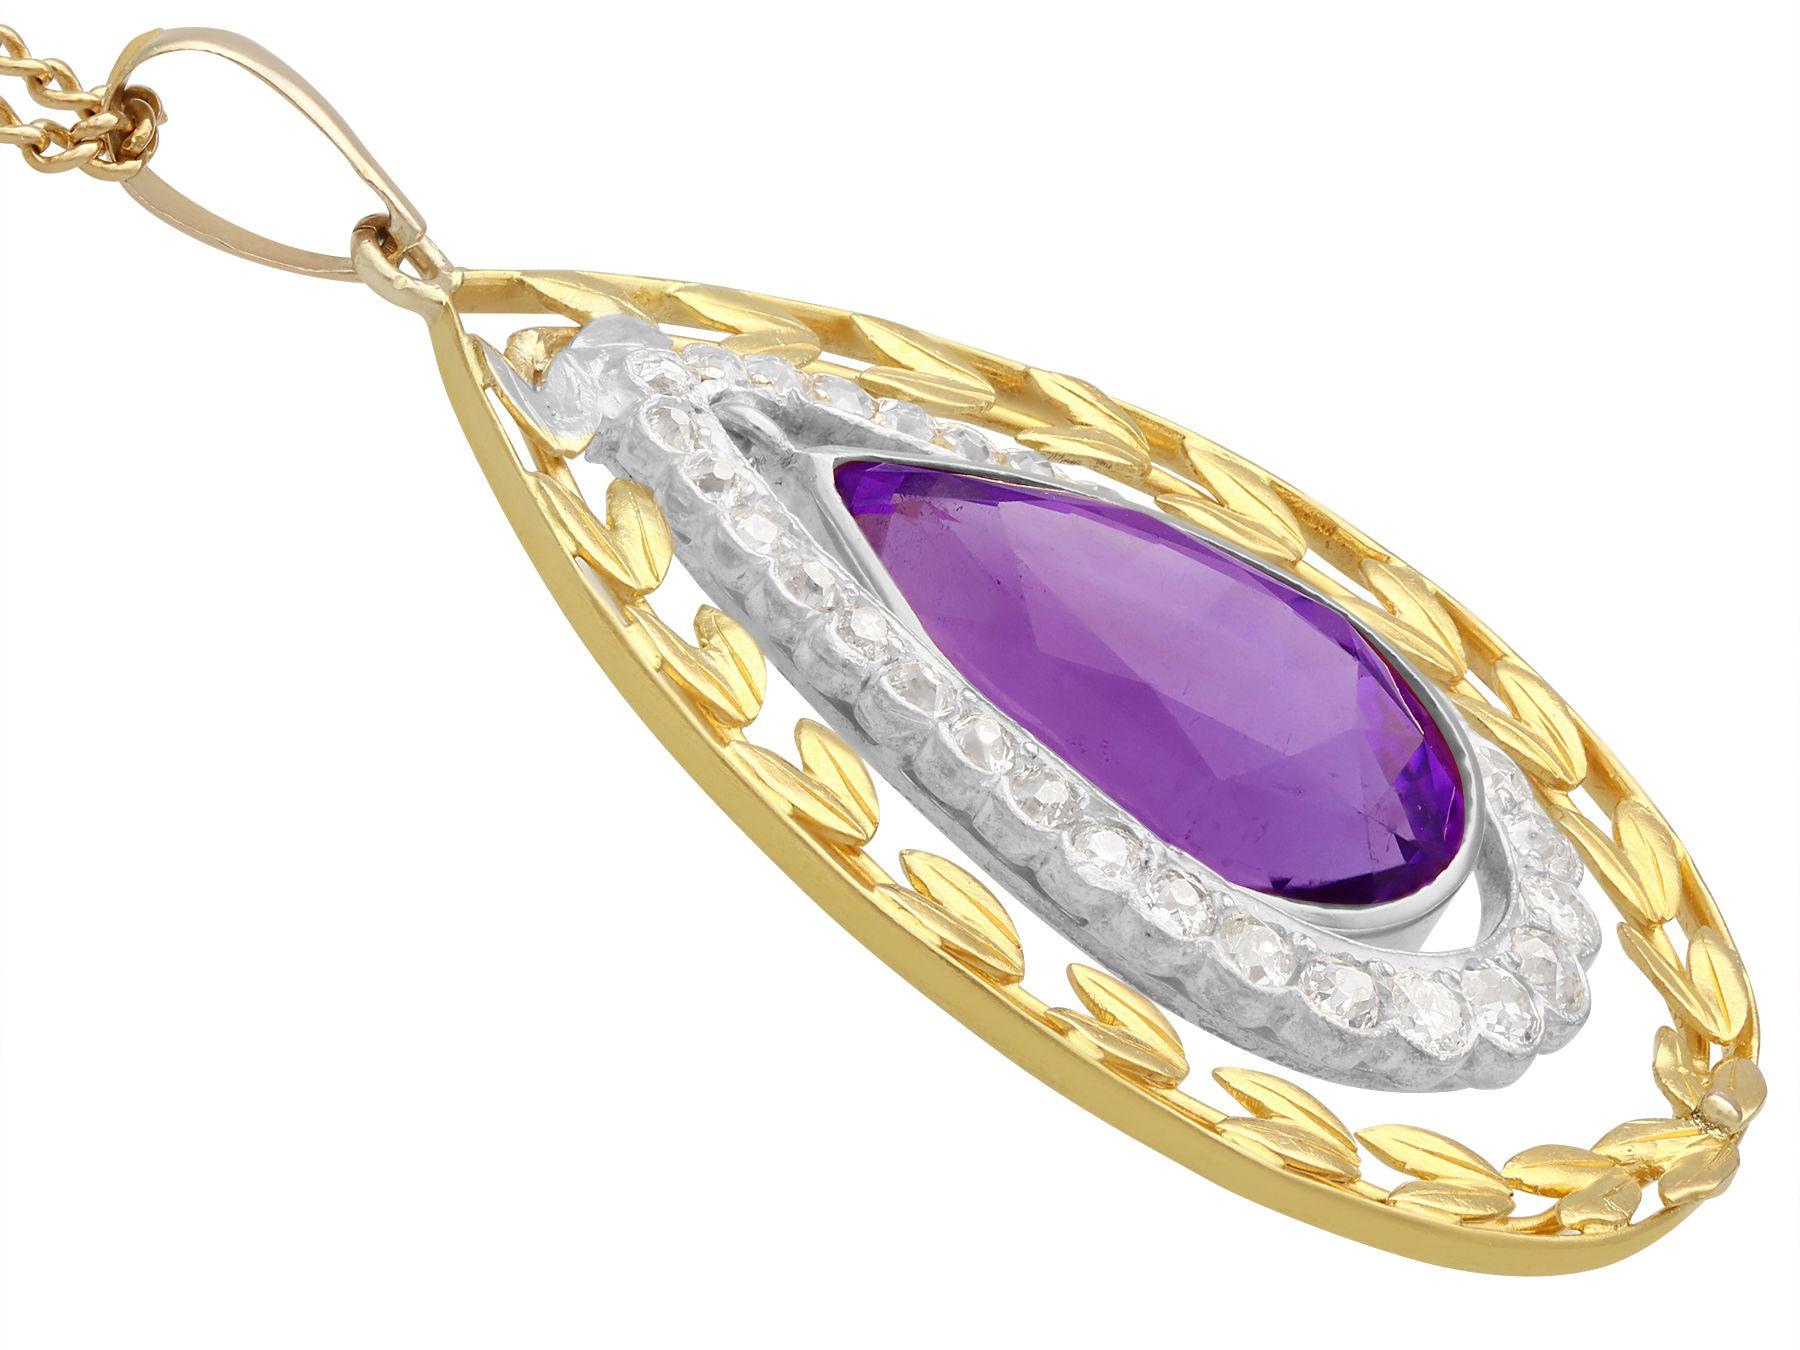 1900s Antique 10.88 Carat Amethyst and 1.88 Carat Diamond Yellow Gold Pendant In Excellent Condition For Sale In Jesmond, Newcastle Upon Tyne